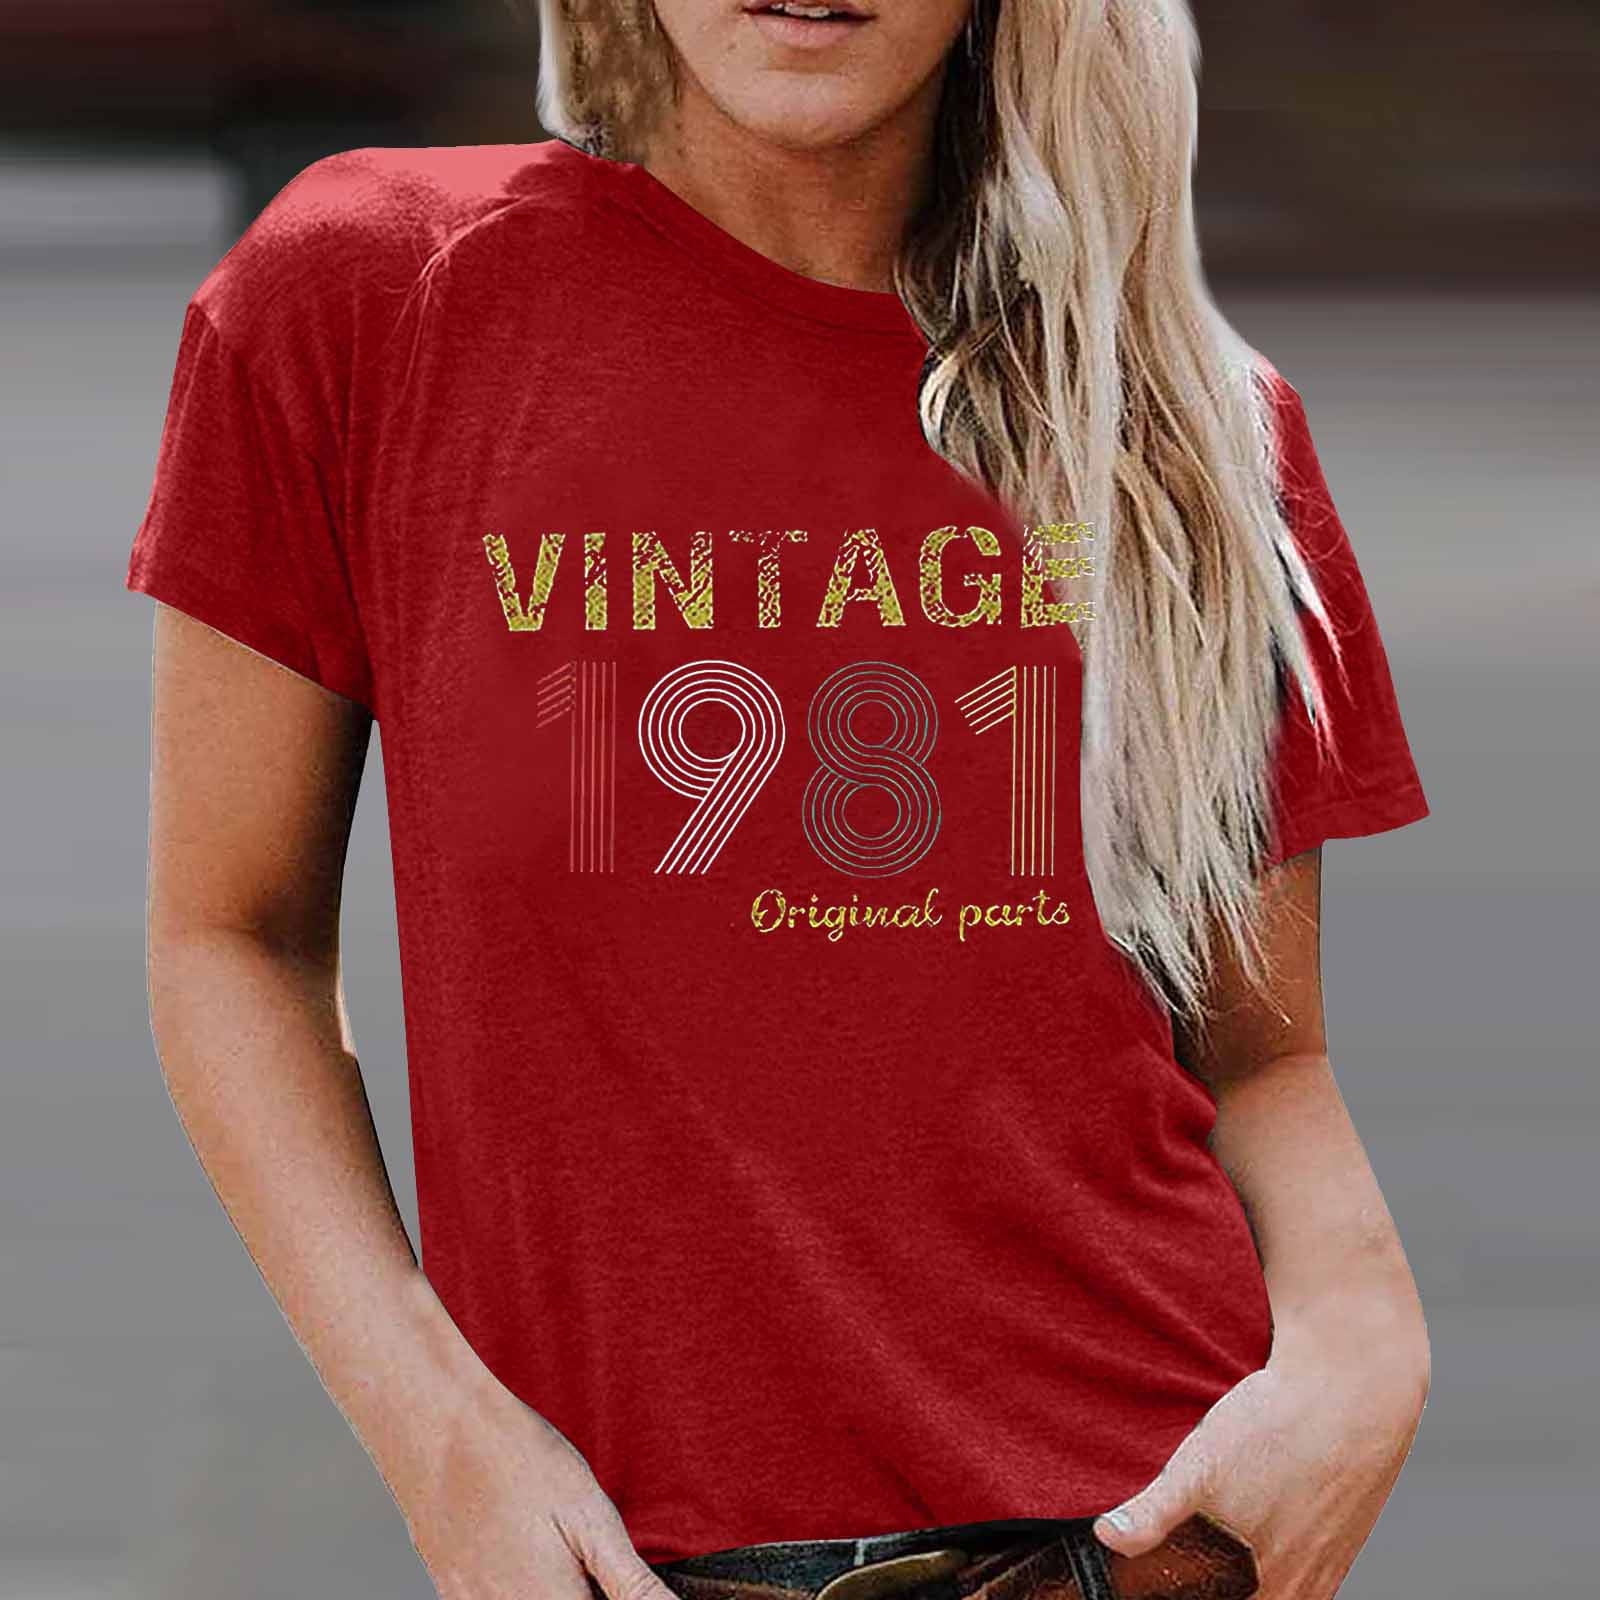 Women Vintage 1971 Original Parts Graphic Tees Summer Casual O-Neck Cute Tops Short Sleeve 50th Birthday Gift Shirts 